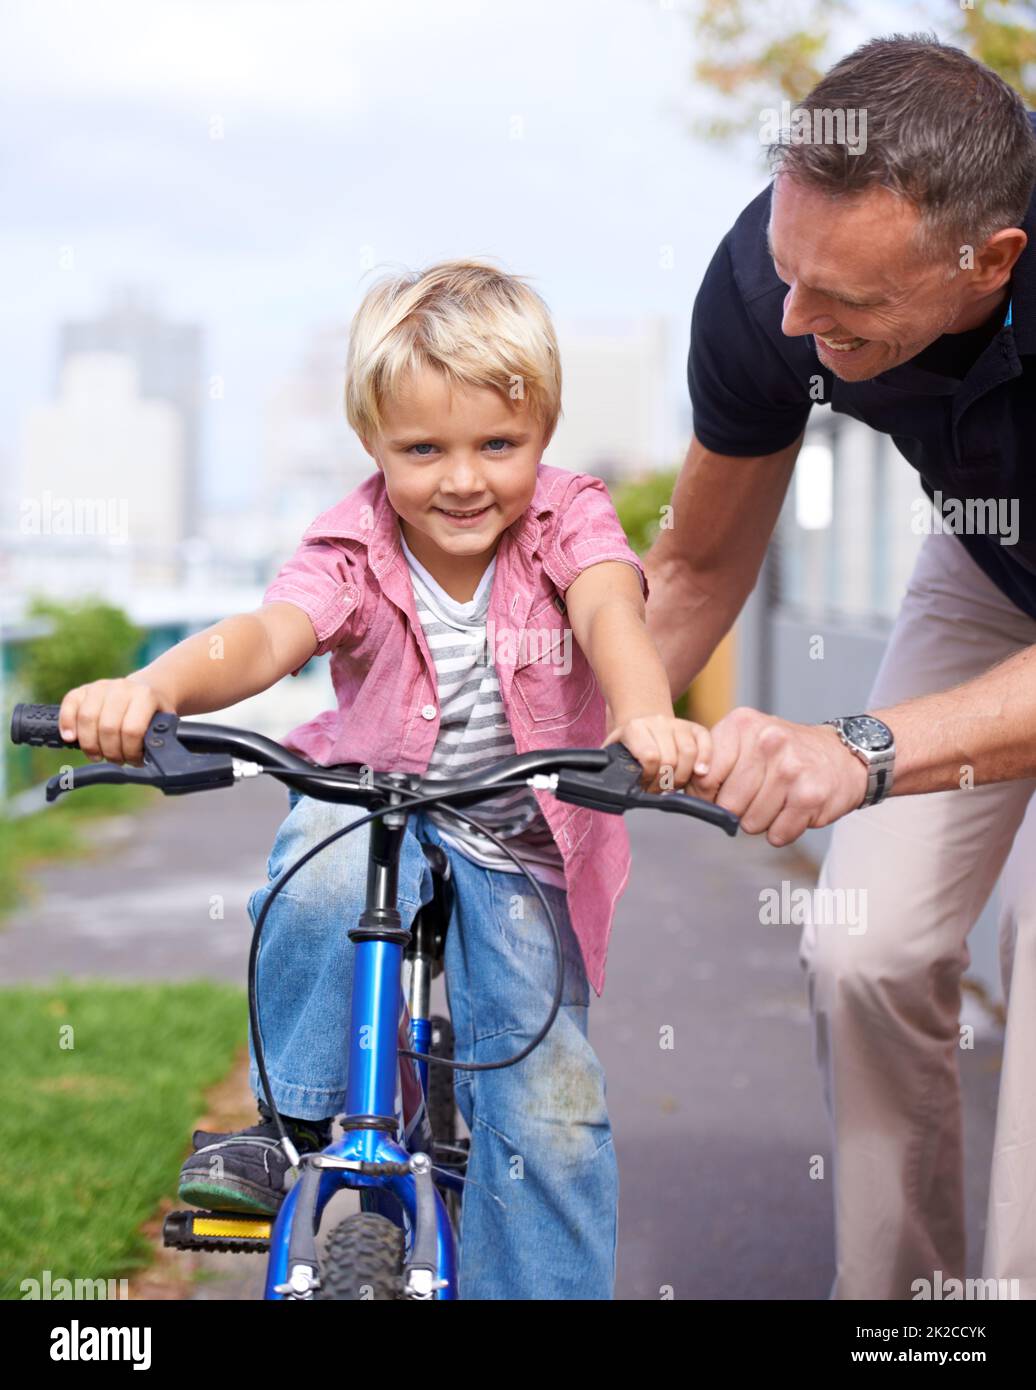 How to Ride a Bike - Learn How to Ride a Bike as an Adult